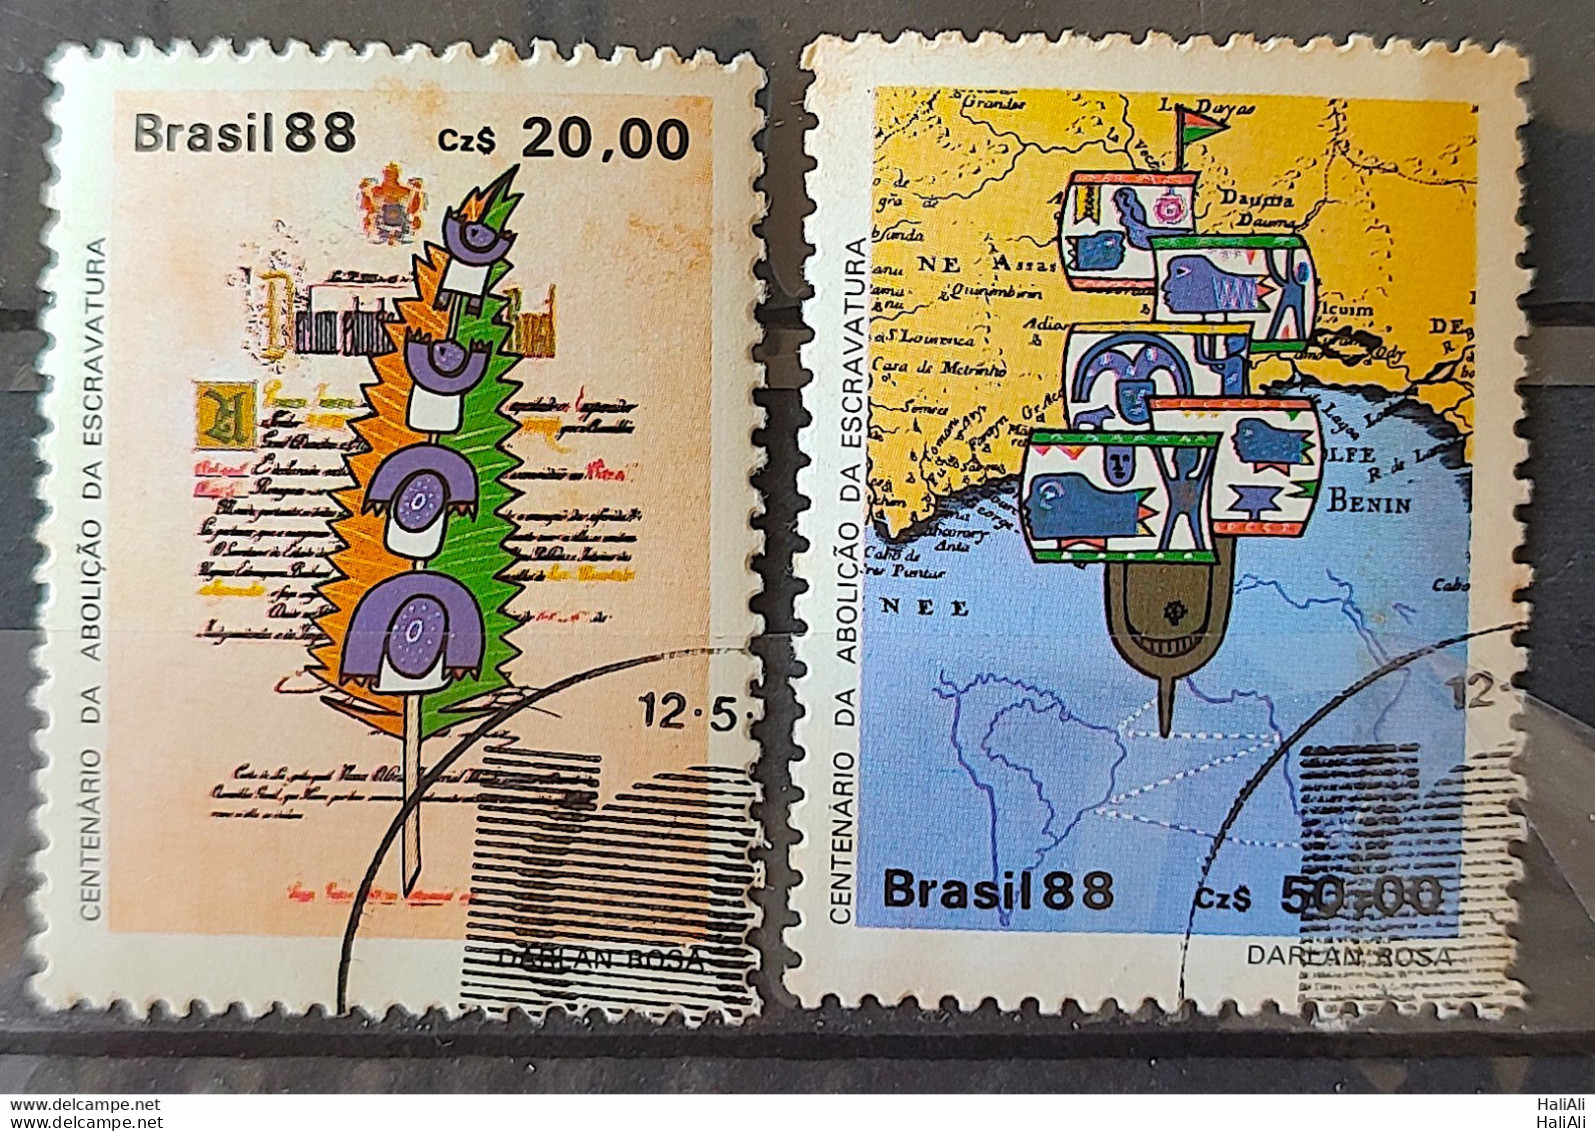 C 1583 Brazil Stamp 100 Years Abolition Of Slavery Law Aurea Ship Slave 1988 Complete Series Circulated 5 - Usados